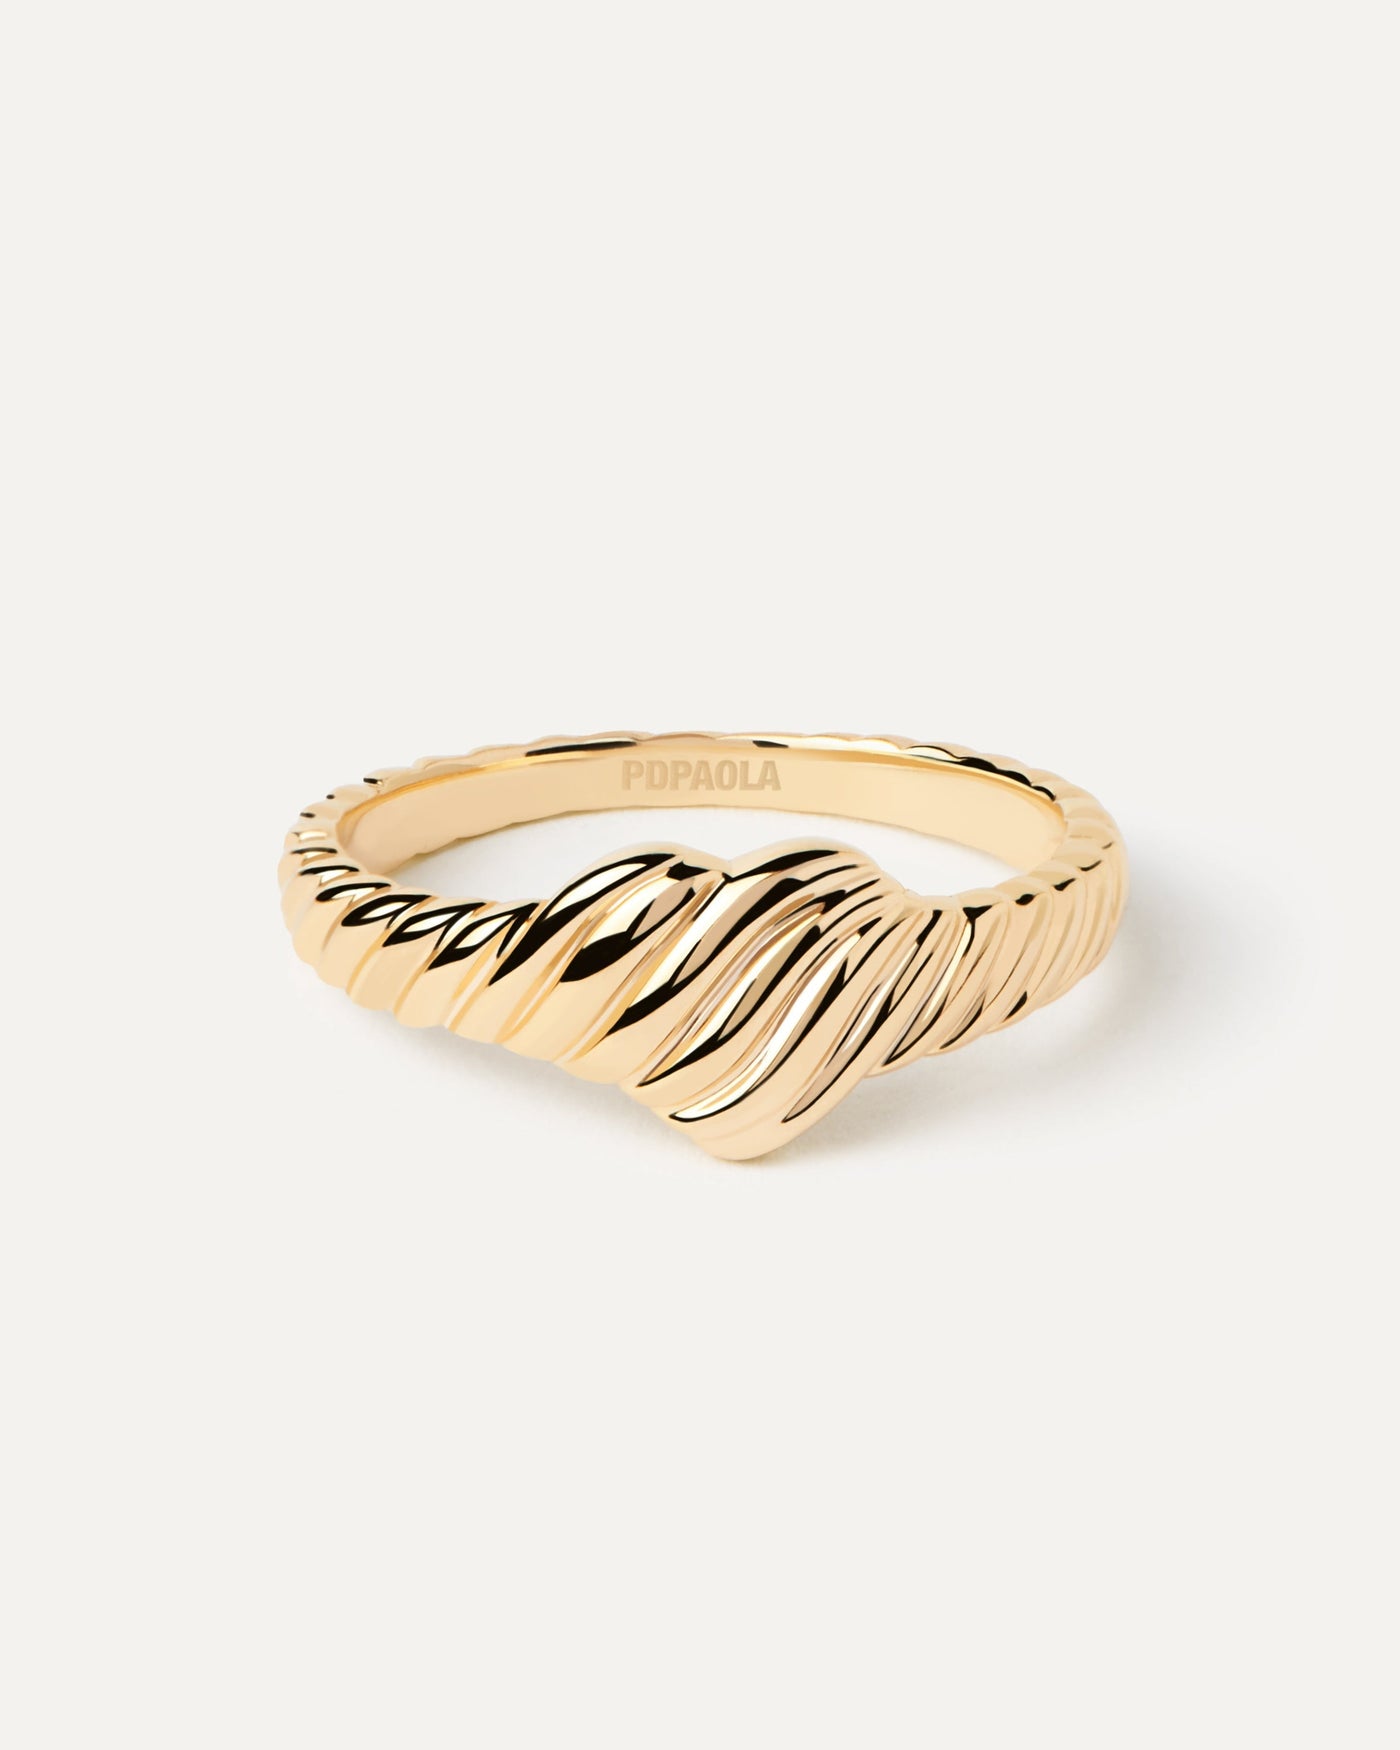 2024 Selection | Gold Love Stamp Ring. Anillo sello de oro amarillo macizo con textura de rayas y sello en forma de corazón. Get the latest arrival from PDPAOLA. Place your order safely and get this Best Seller. Free Shipping.